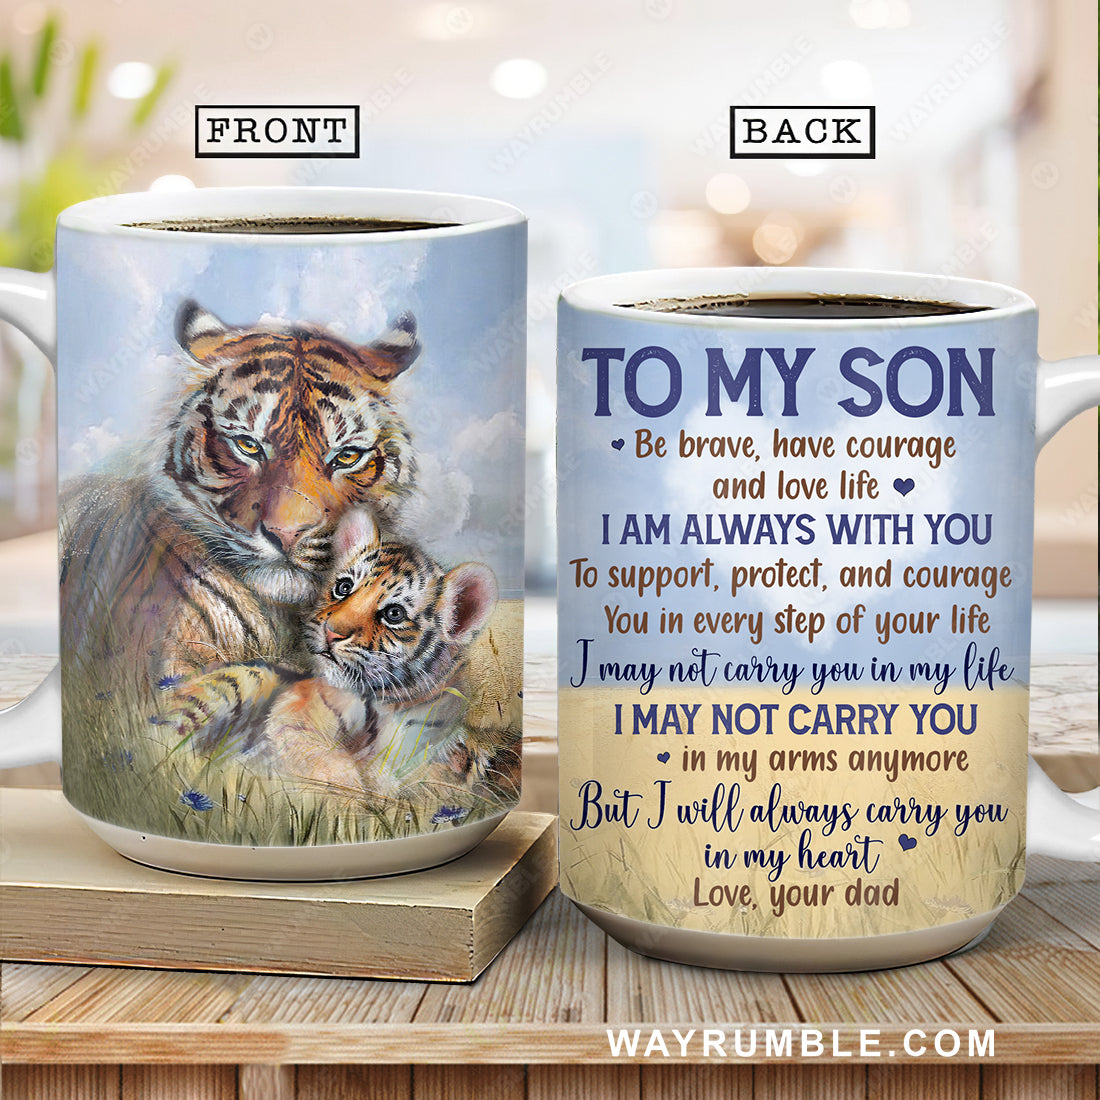 Dad to son, The amazing tiger and his cub, Tiger painting, I will always carry you in my heart - Family AOP Mug